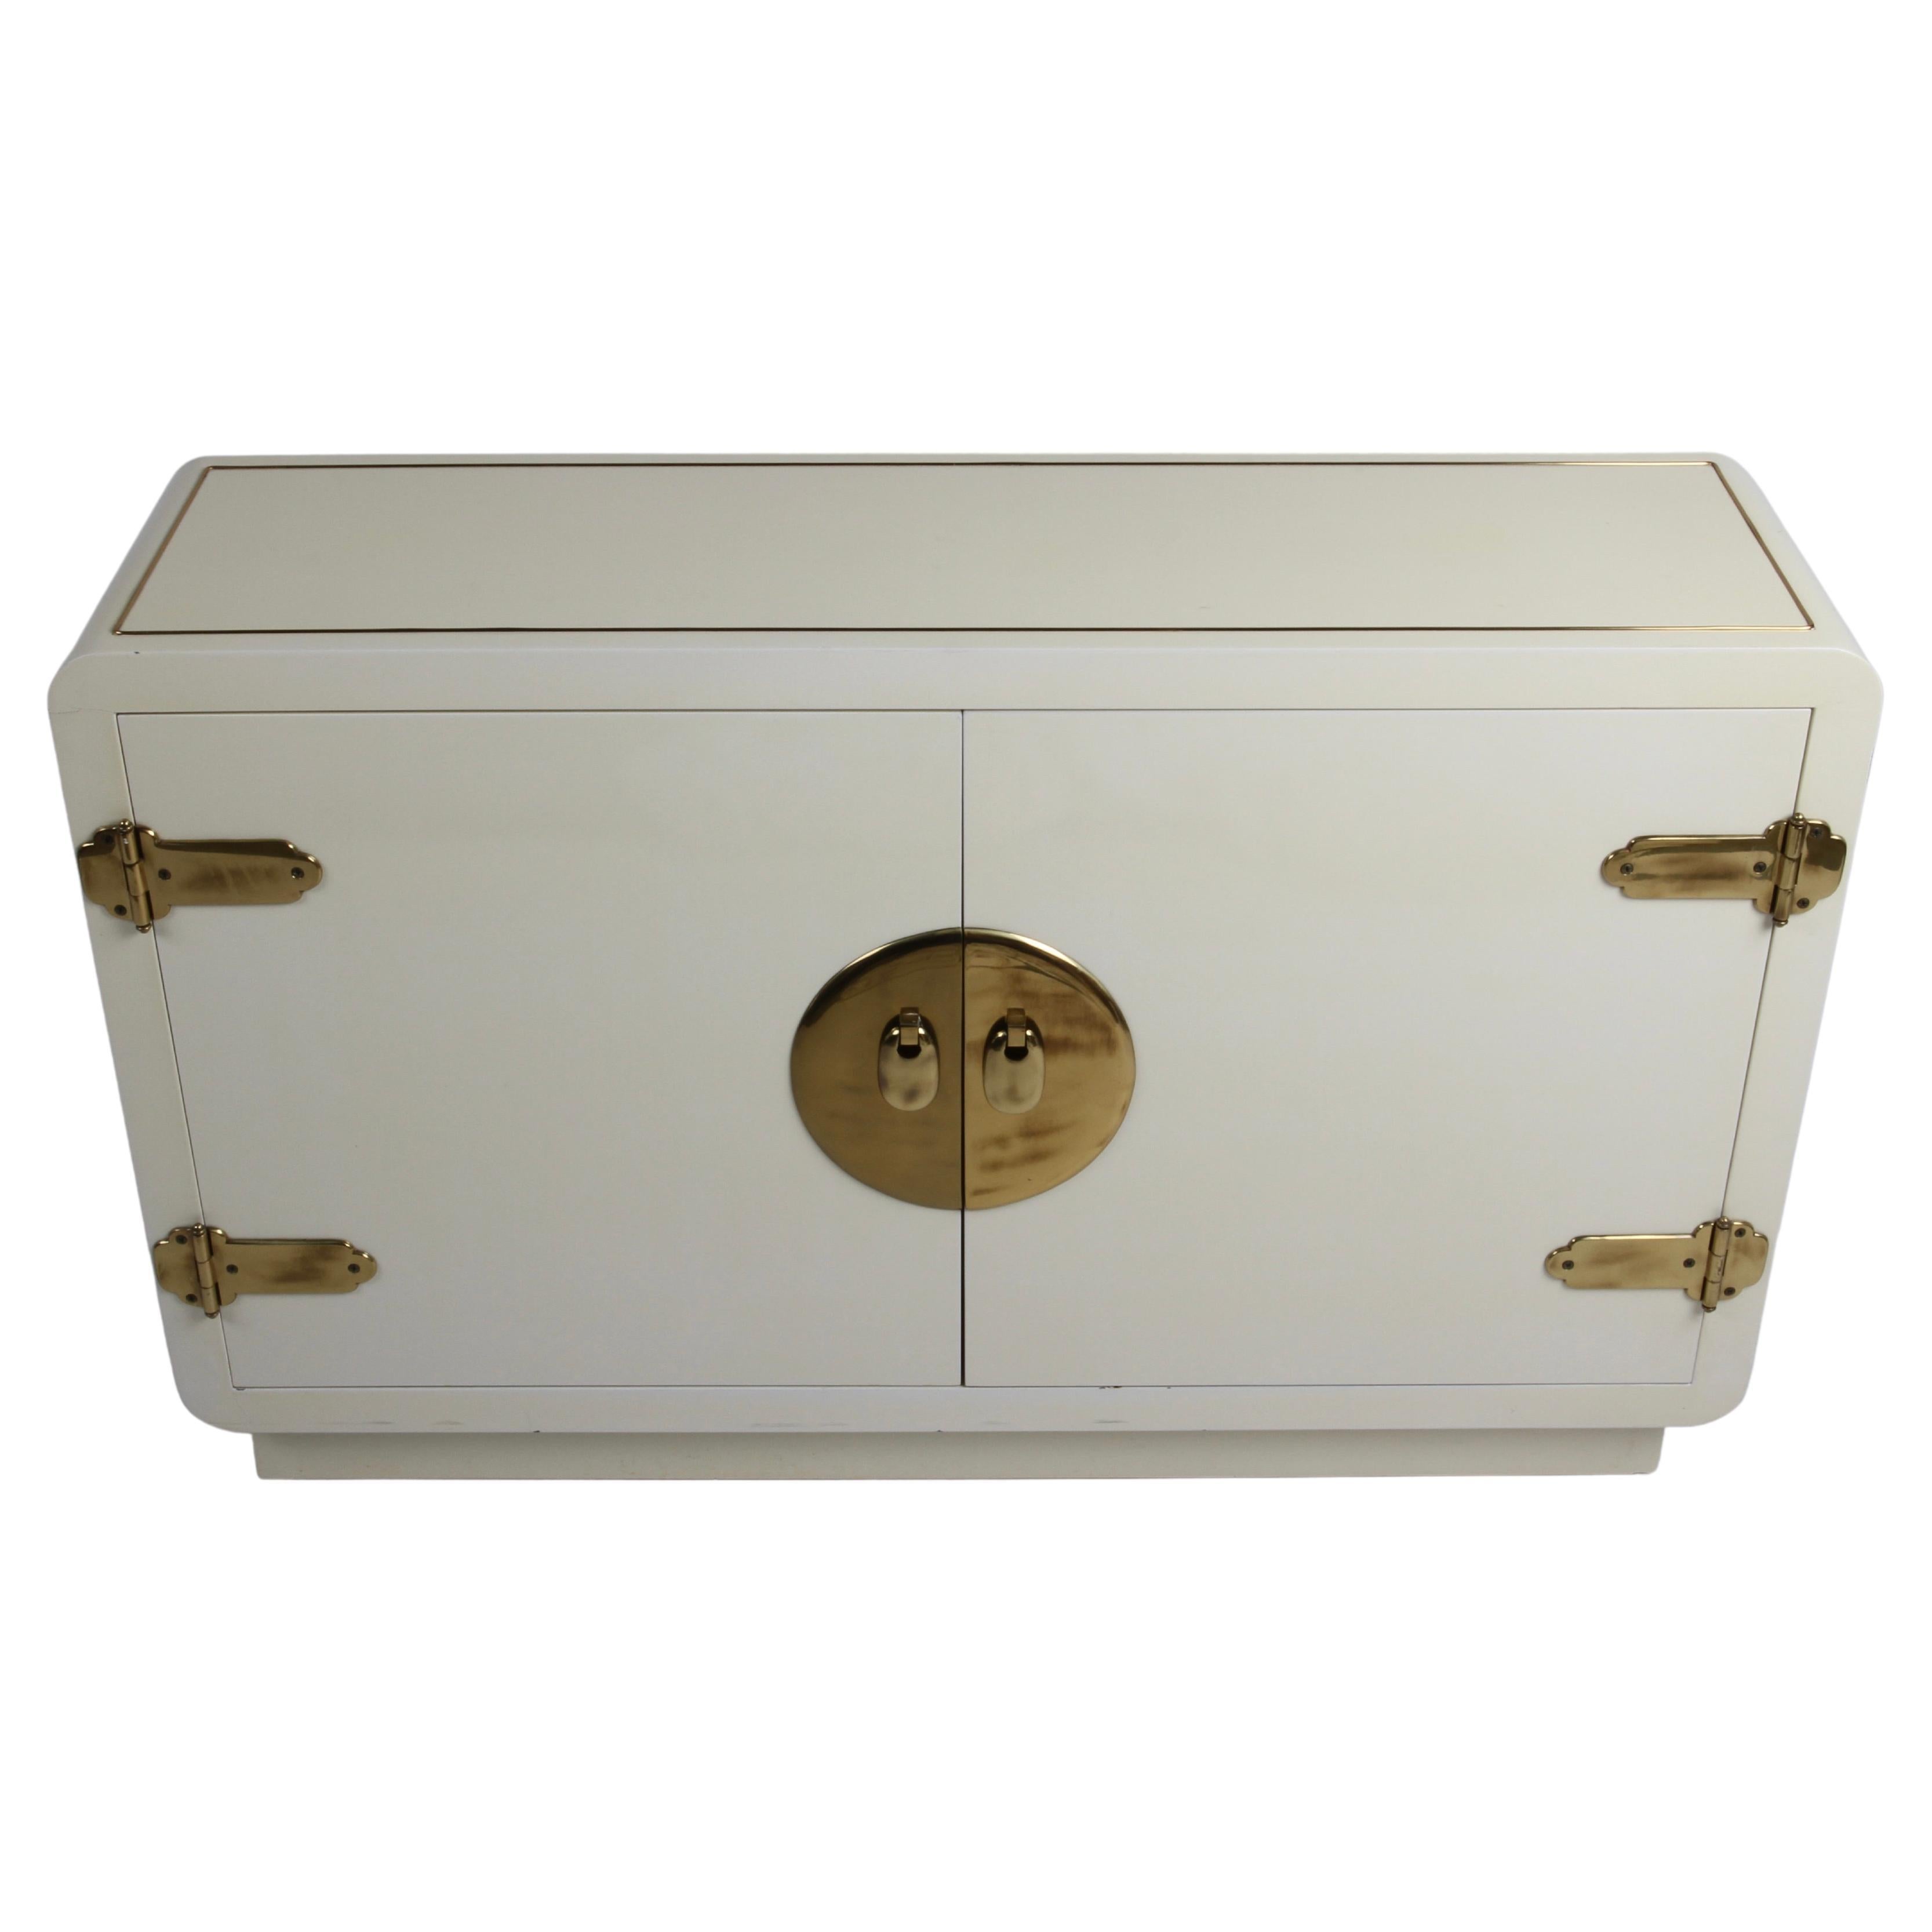 1970s Mastercraft Asian Inspired Cabinet in Creme Lacquer with Brass Hardware  For Sale